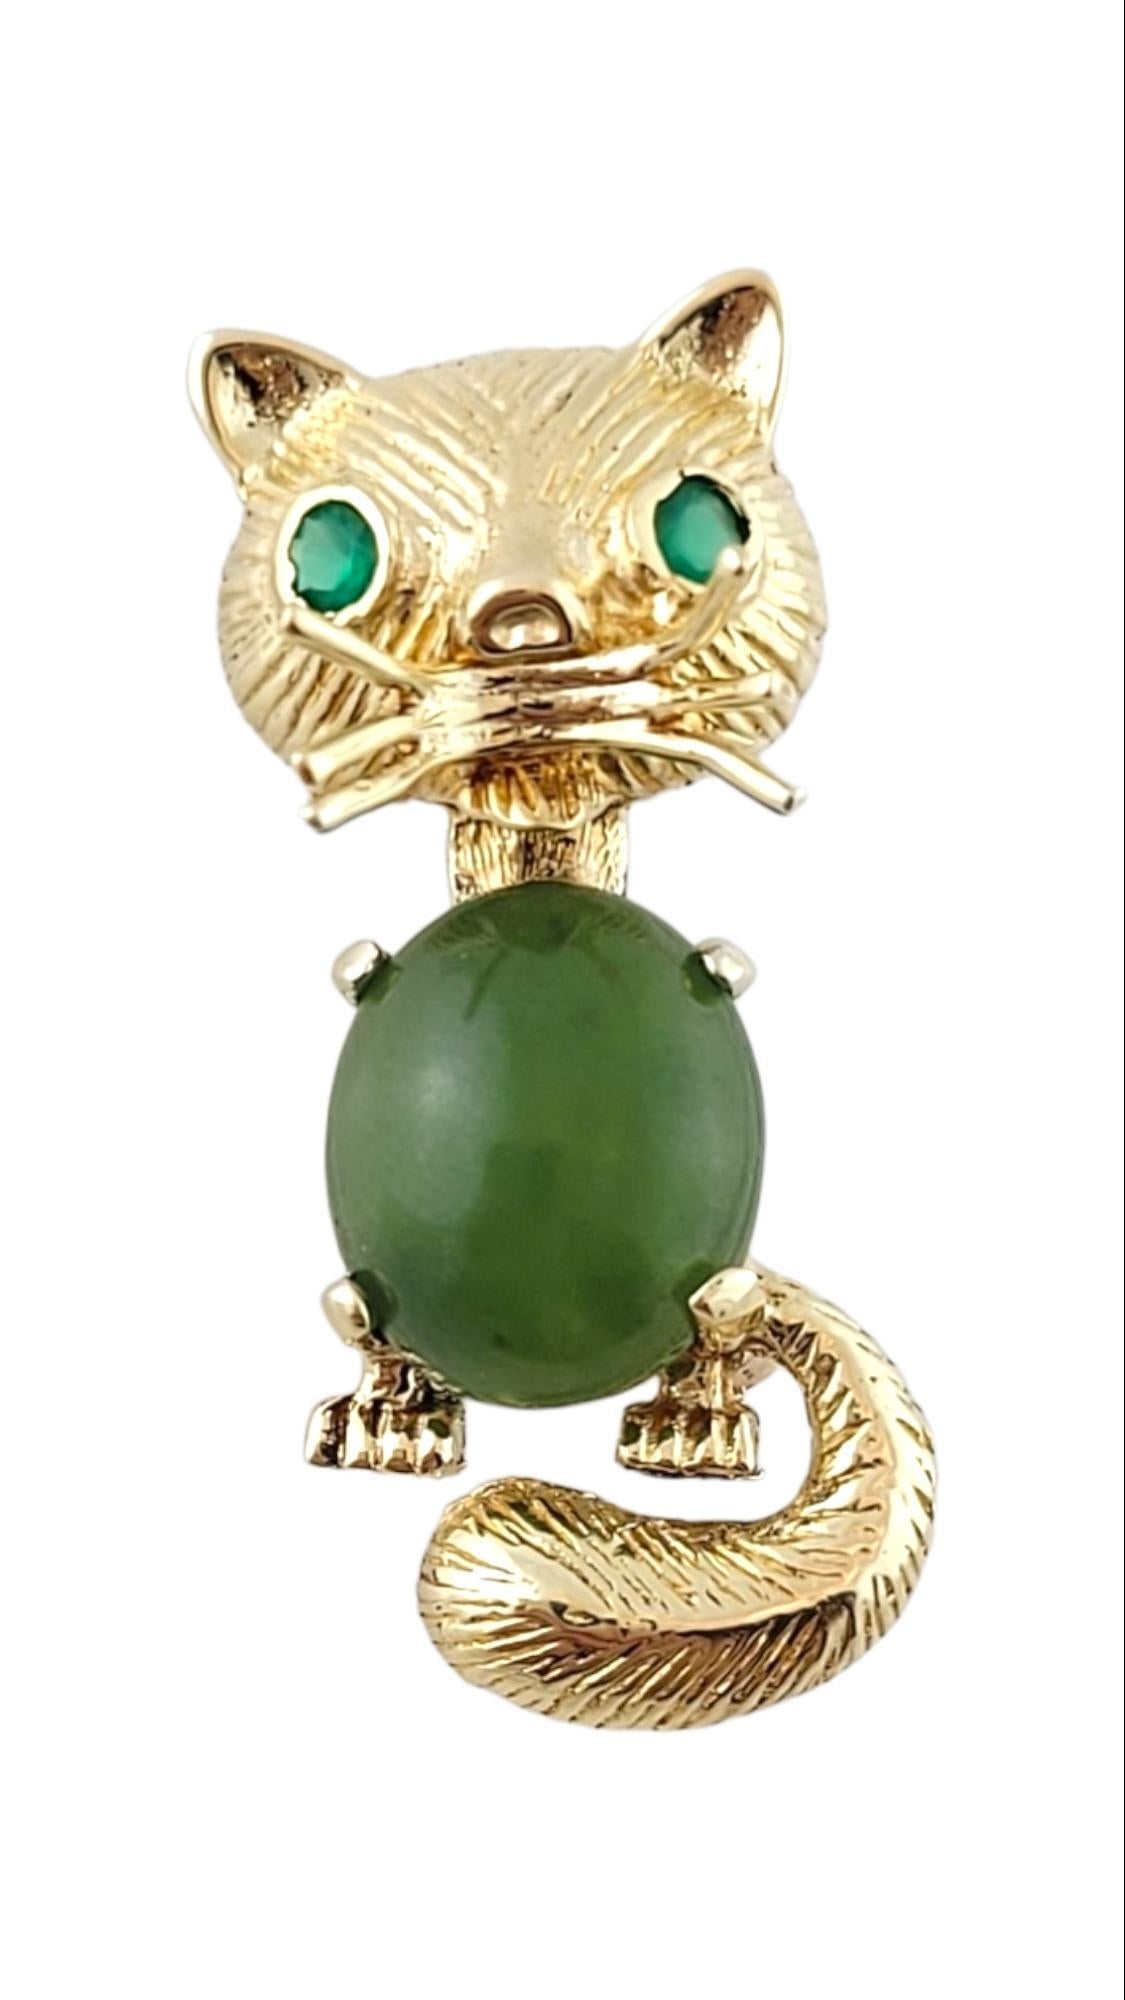 14K Yellow Gold Green Stone Cat Pin

This adorable cat pin is crafted from 14K yellow gold and features two faceted green stones to represent eyes and one green cabachon stone as the cat's body!

Size: 32.8mm X 14.4mm X 12.5mm

Weight: 6.54 g/ 4.2